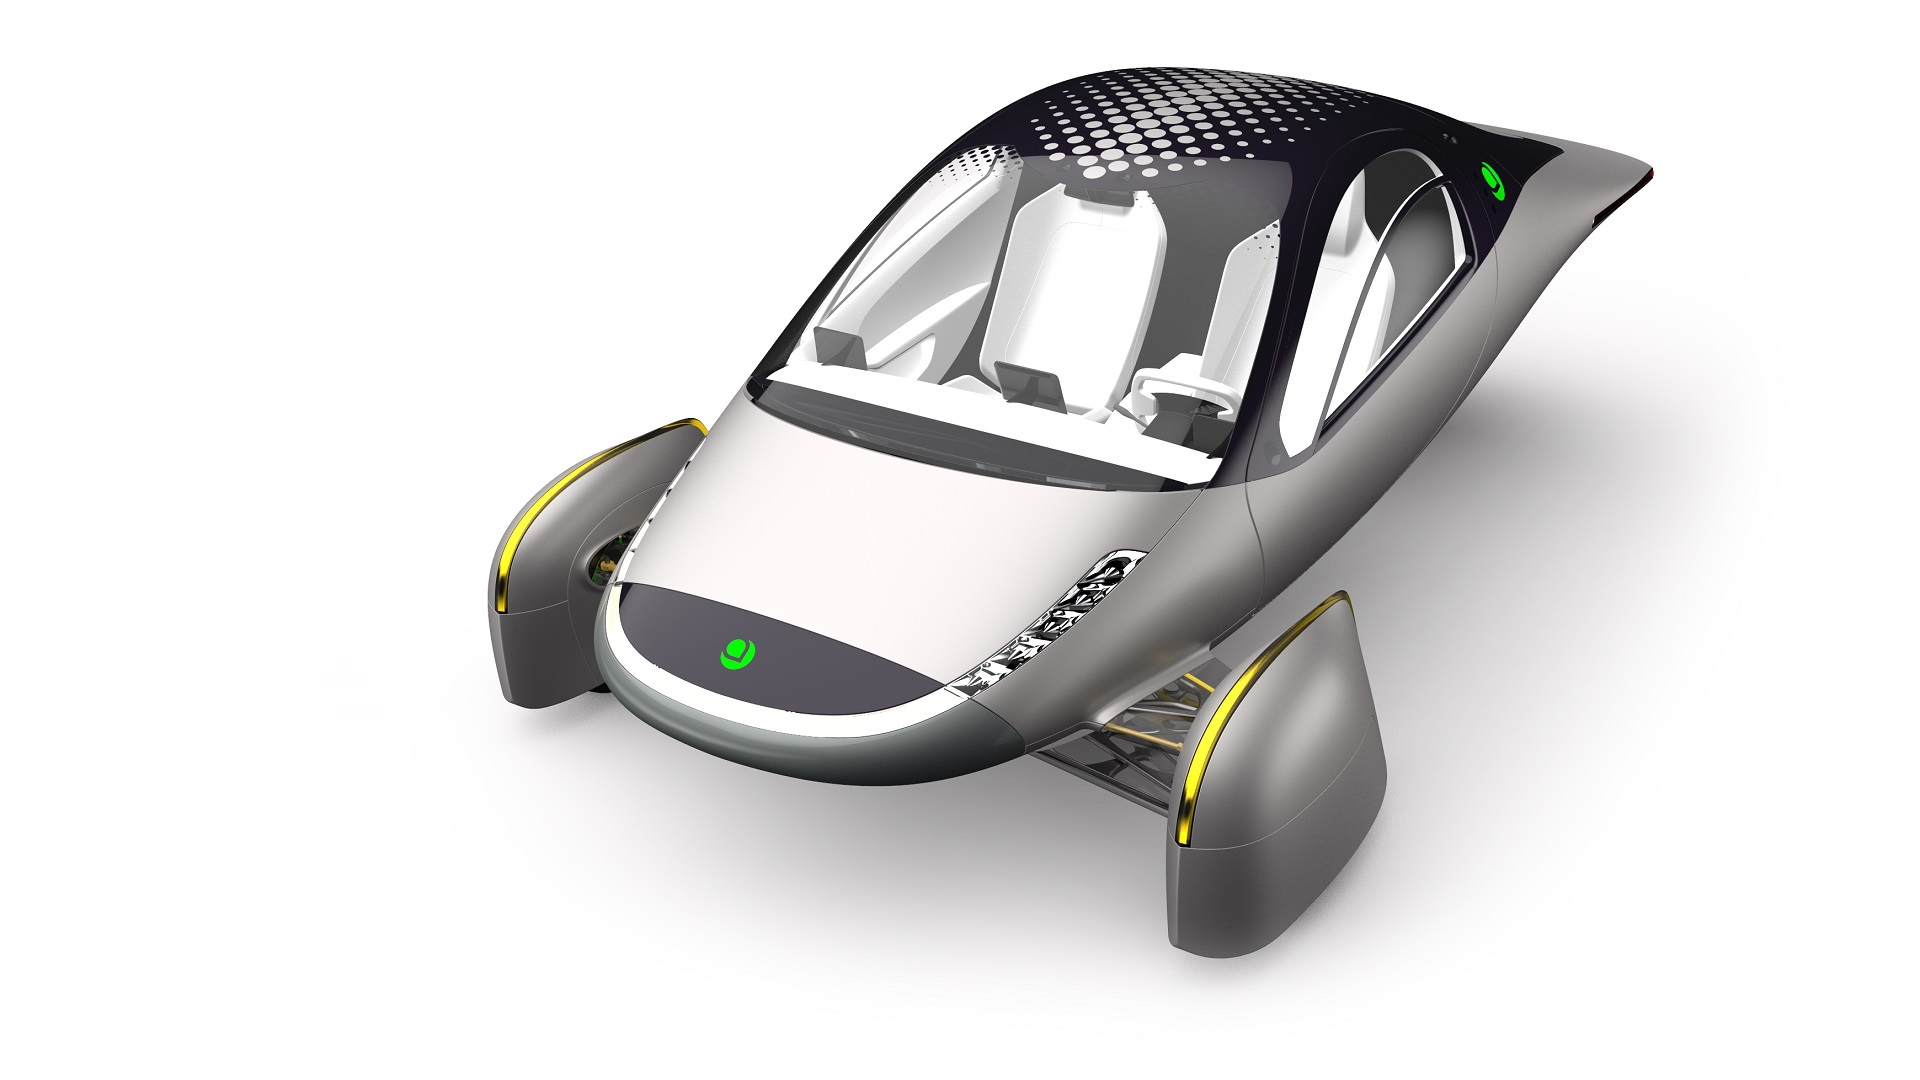 Design for new Aptera electric car, Aug 2019